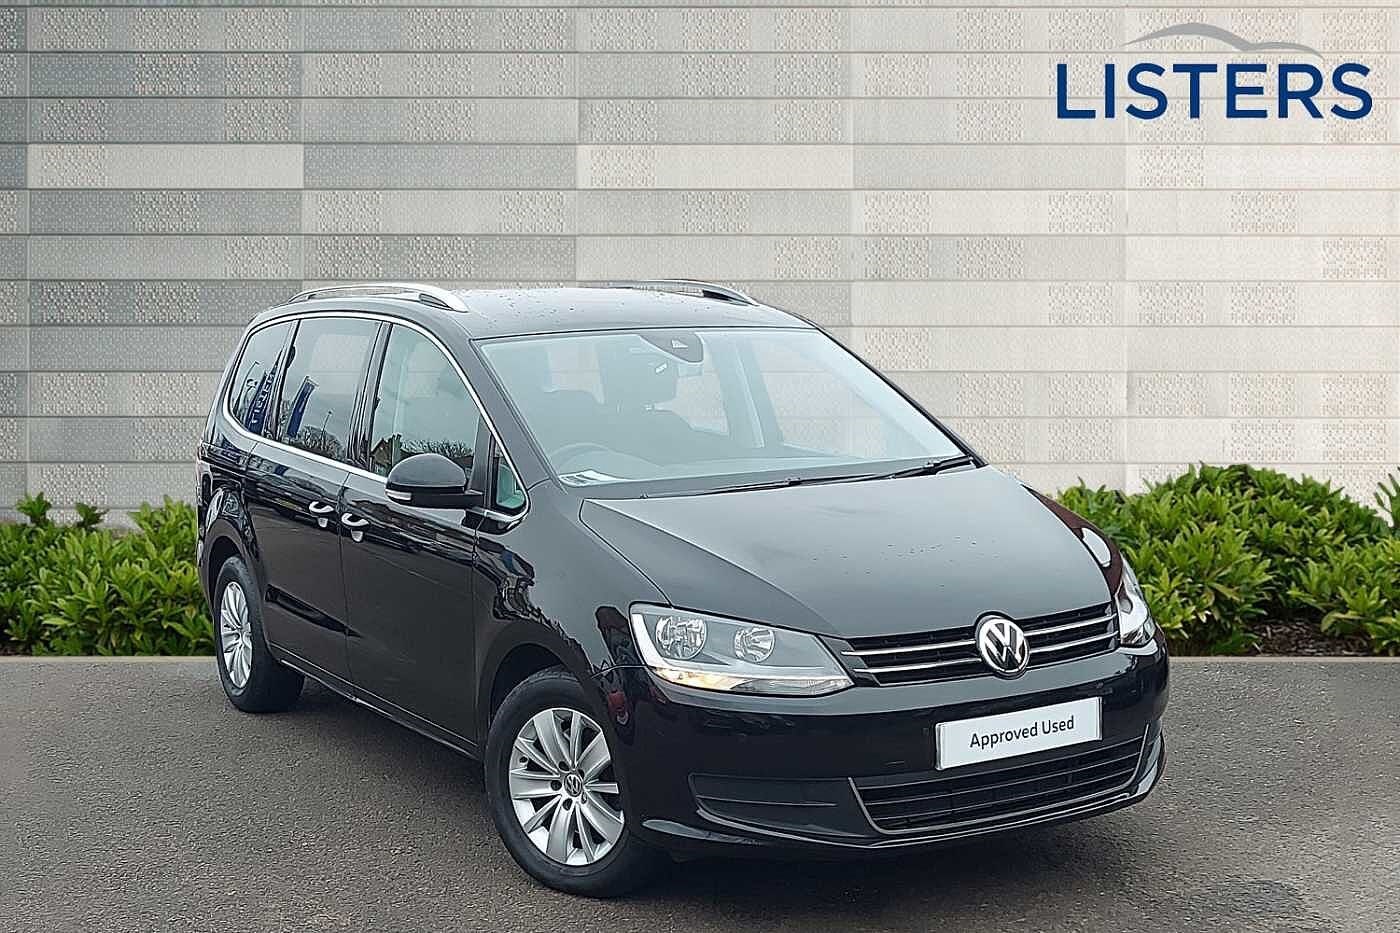 Approved Used VW Sharan for Sale in UK